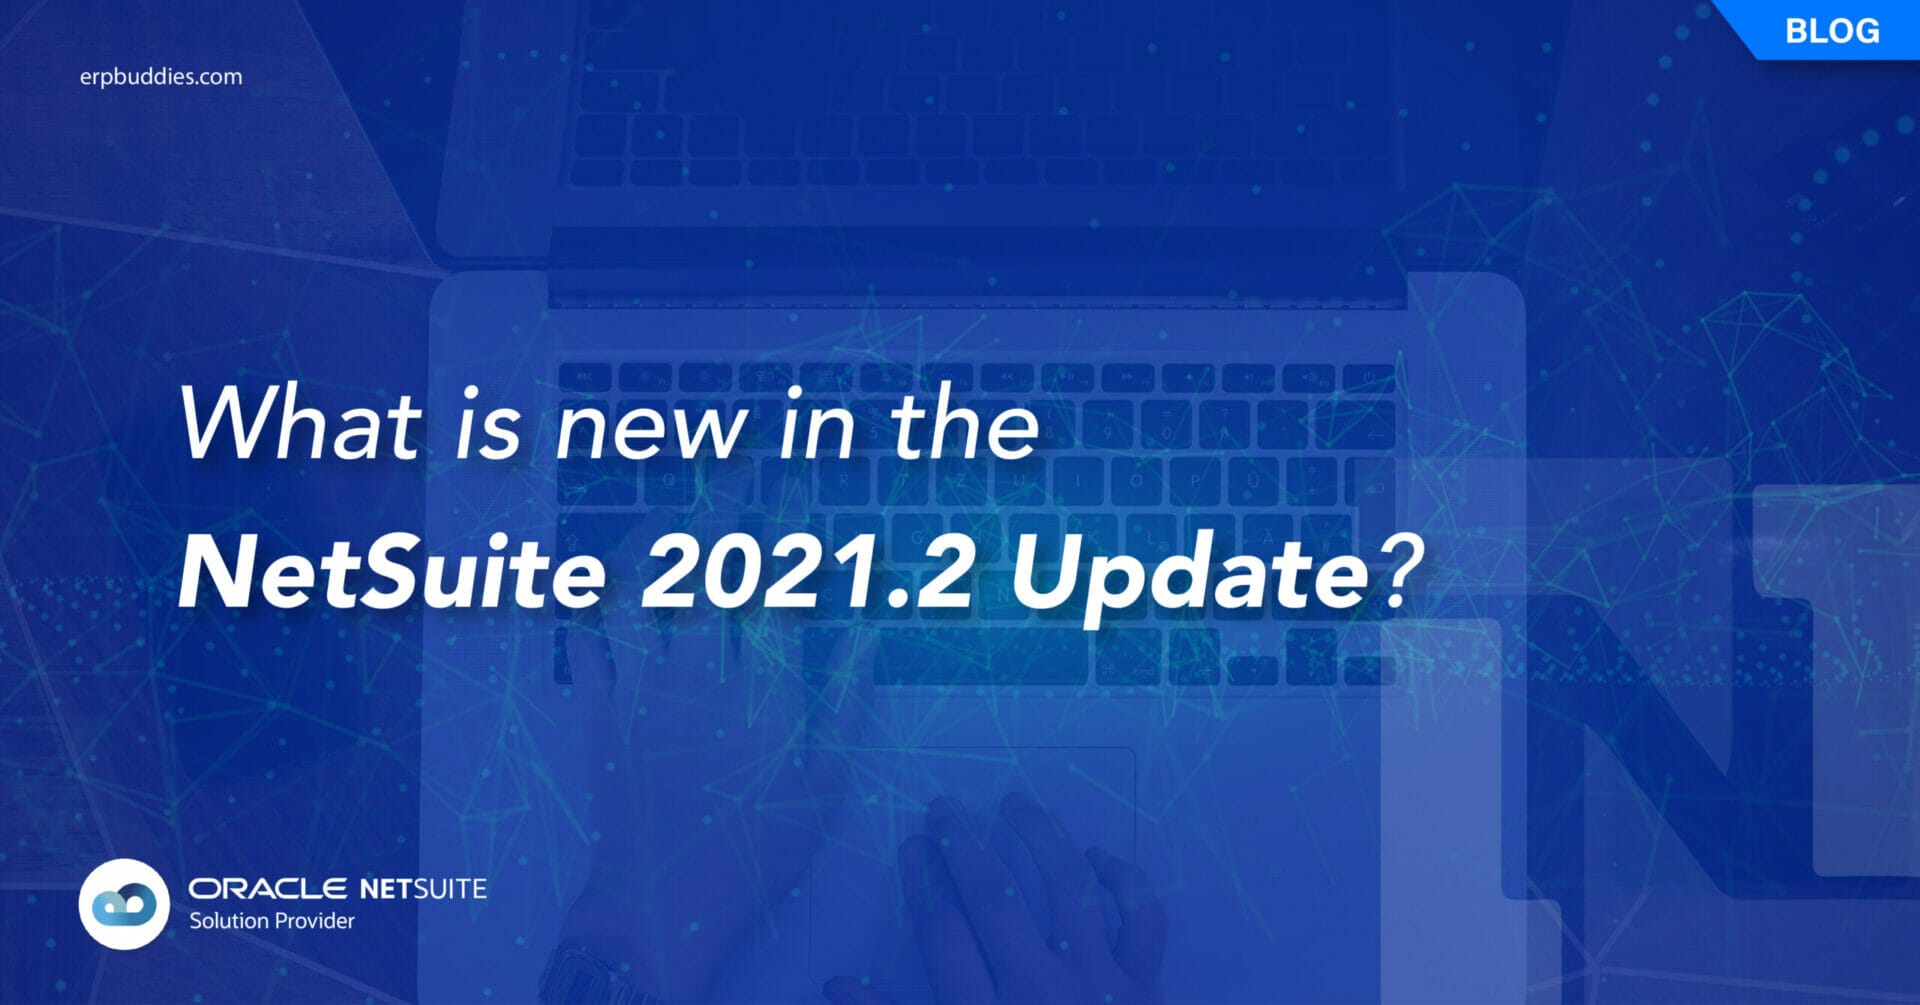 What is new in the NetSuite 2021.2 Update?